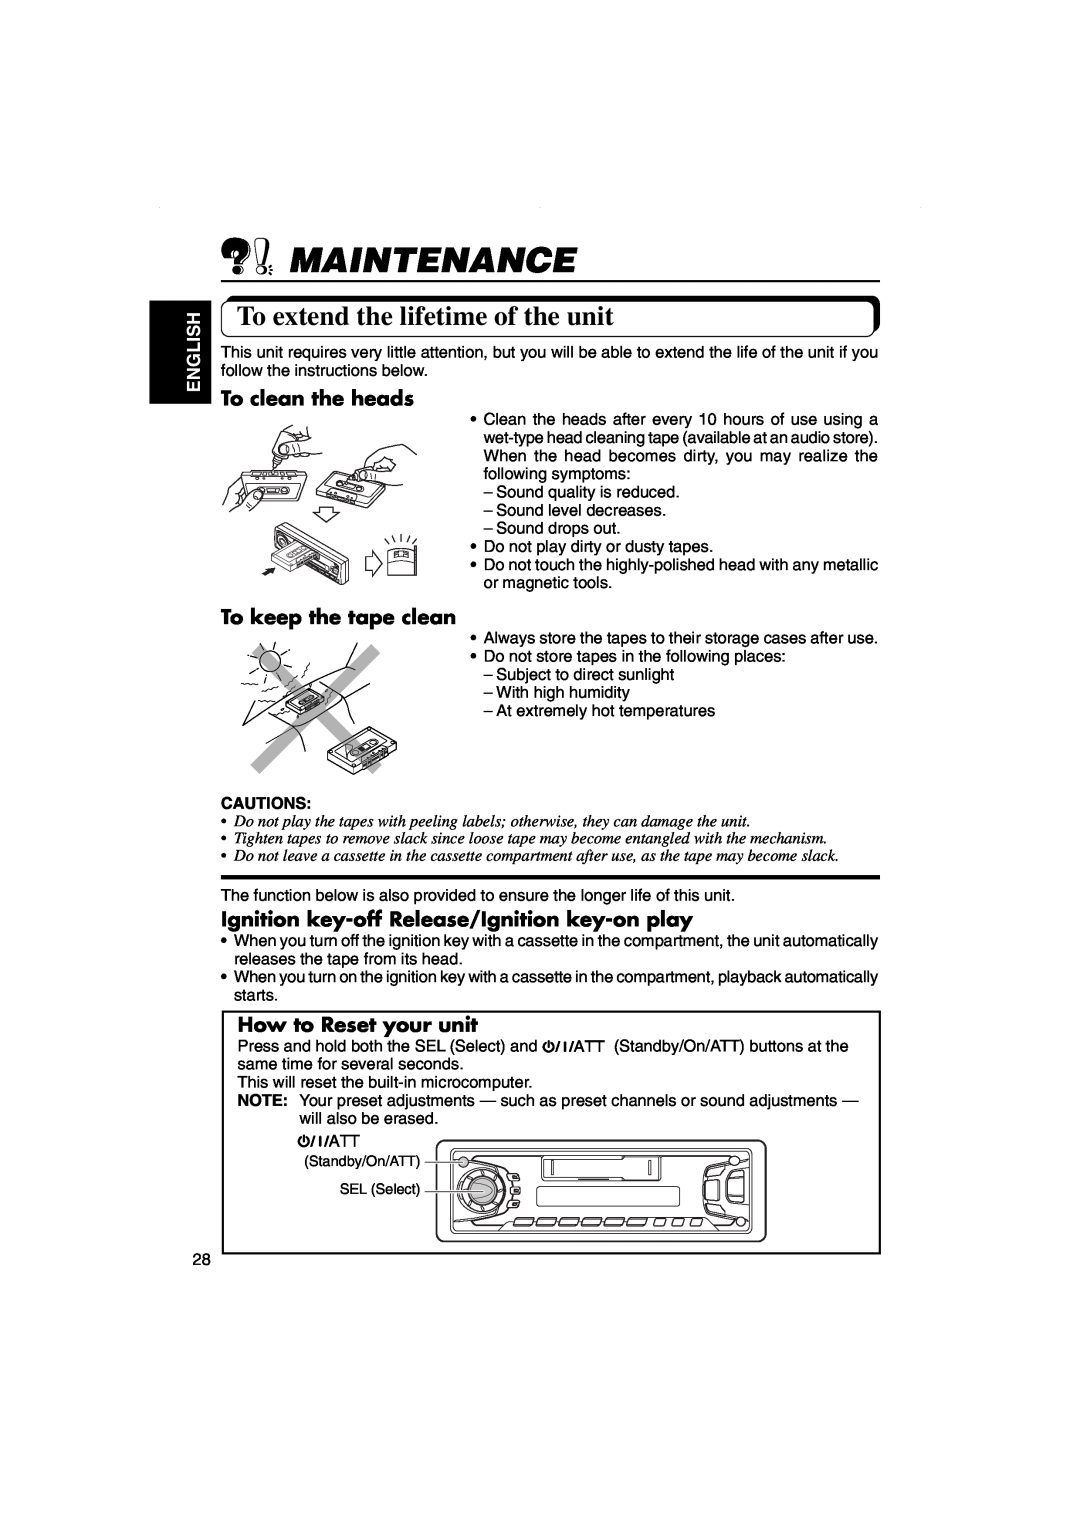 JVC KS-FX270 manual Maintenance, To extend the lifetime of the unit, To clean the heads, To keep the tape clean, English 